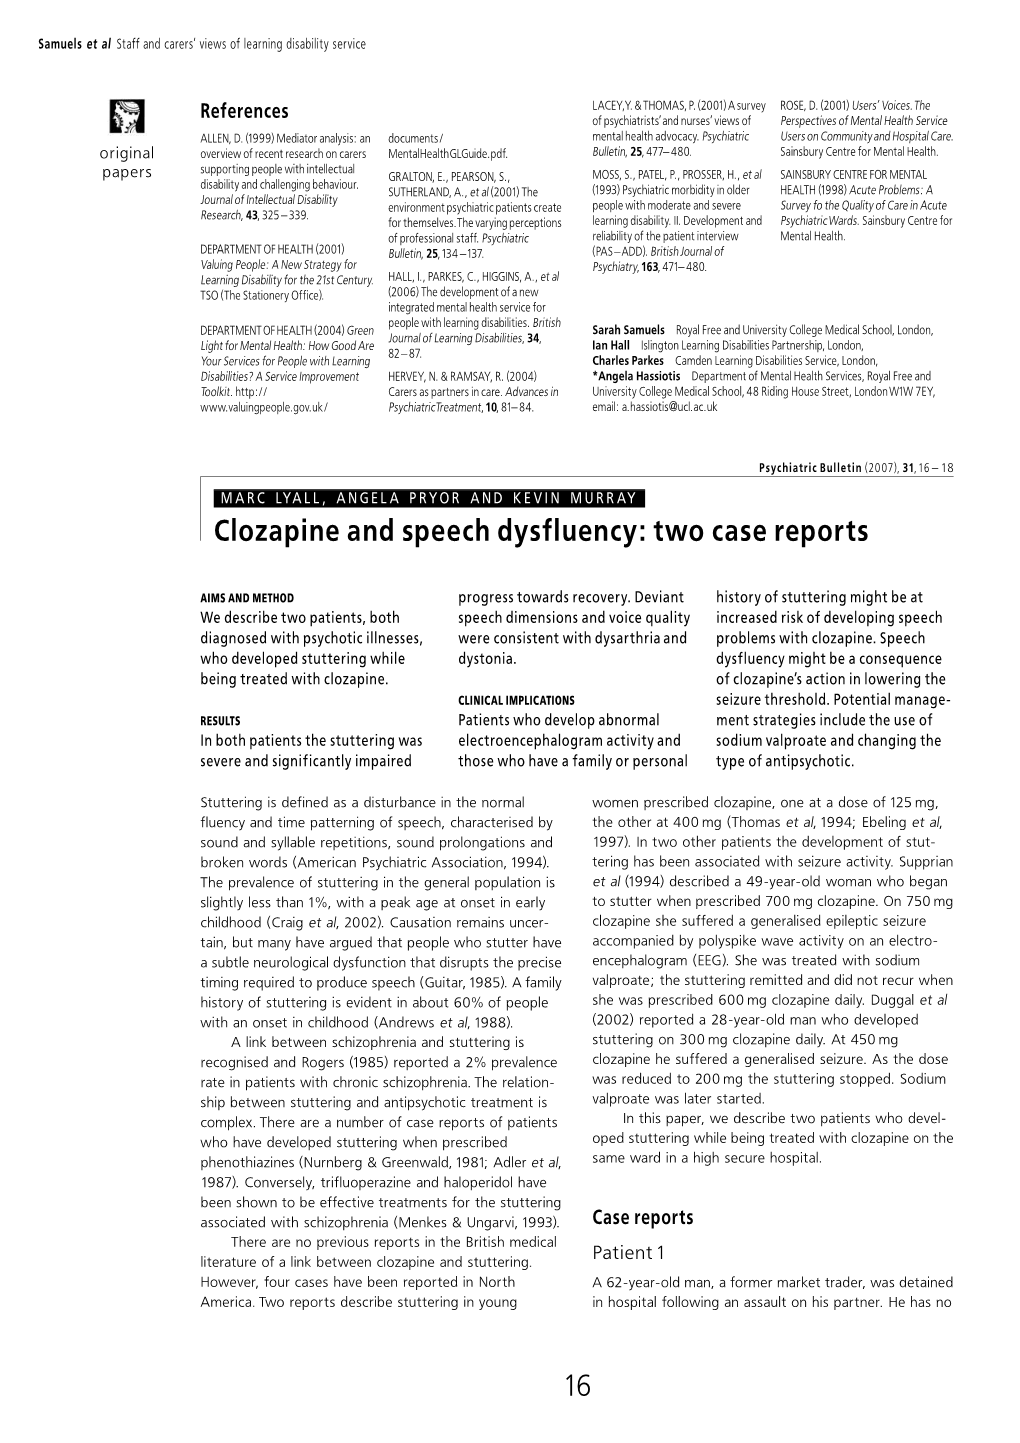 Clozapine and Speech Dysfluency: Two Case Reports